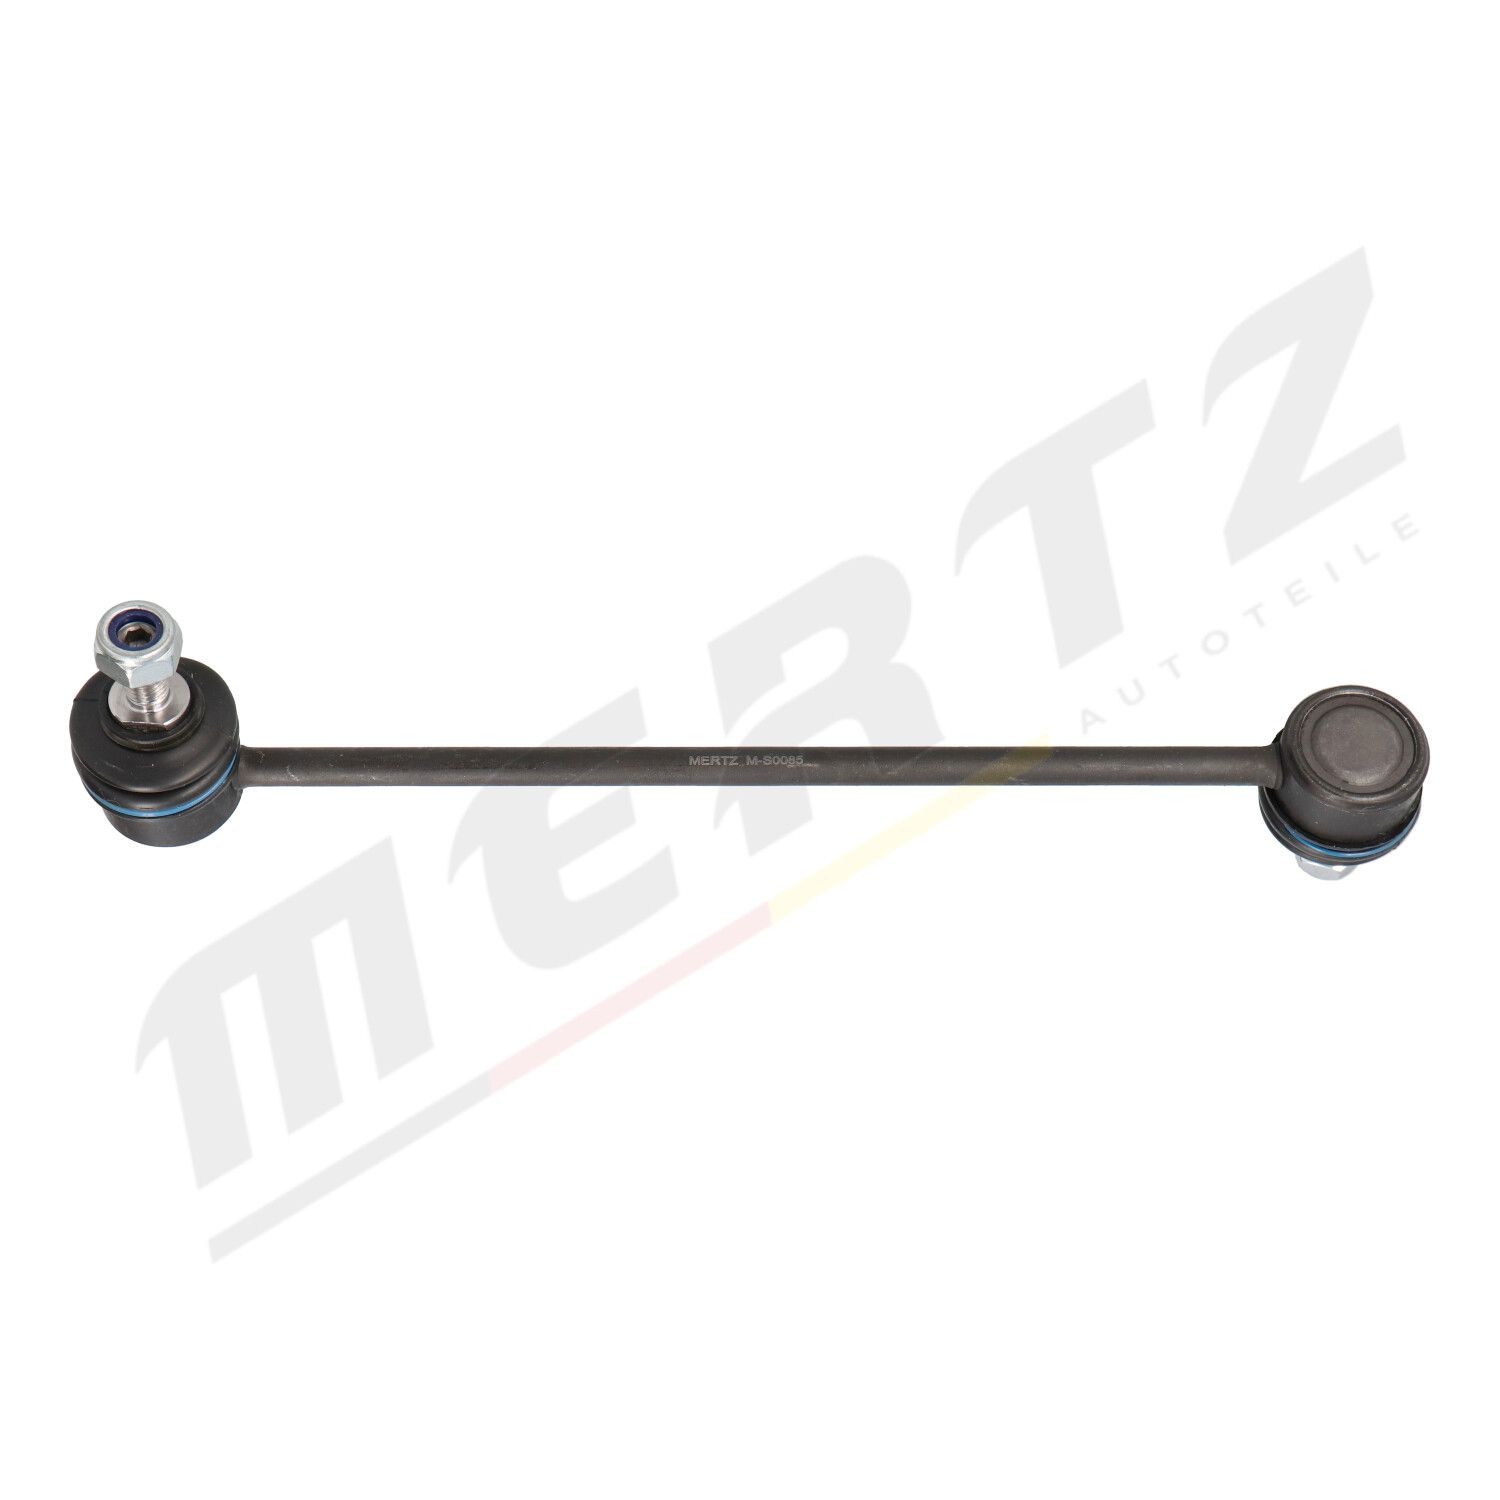 MERTZ Anti-roll bar links rear and front BMW 3 Touring (E46) new M-S0085